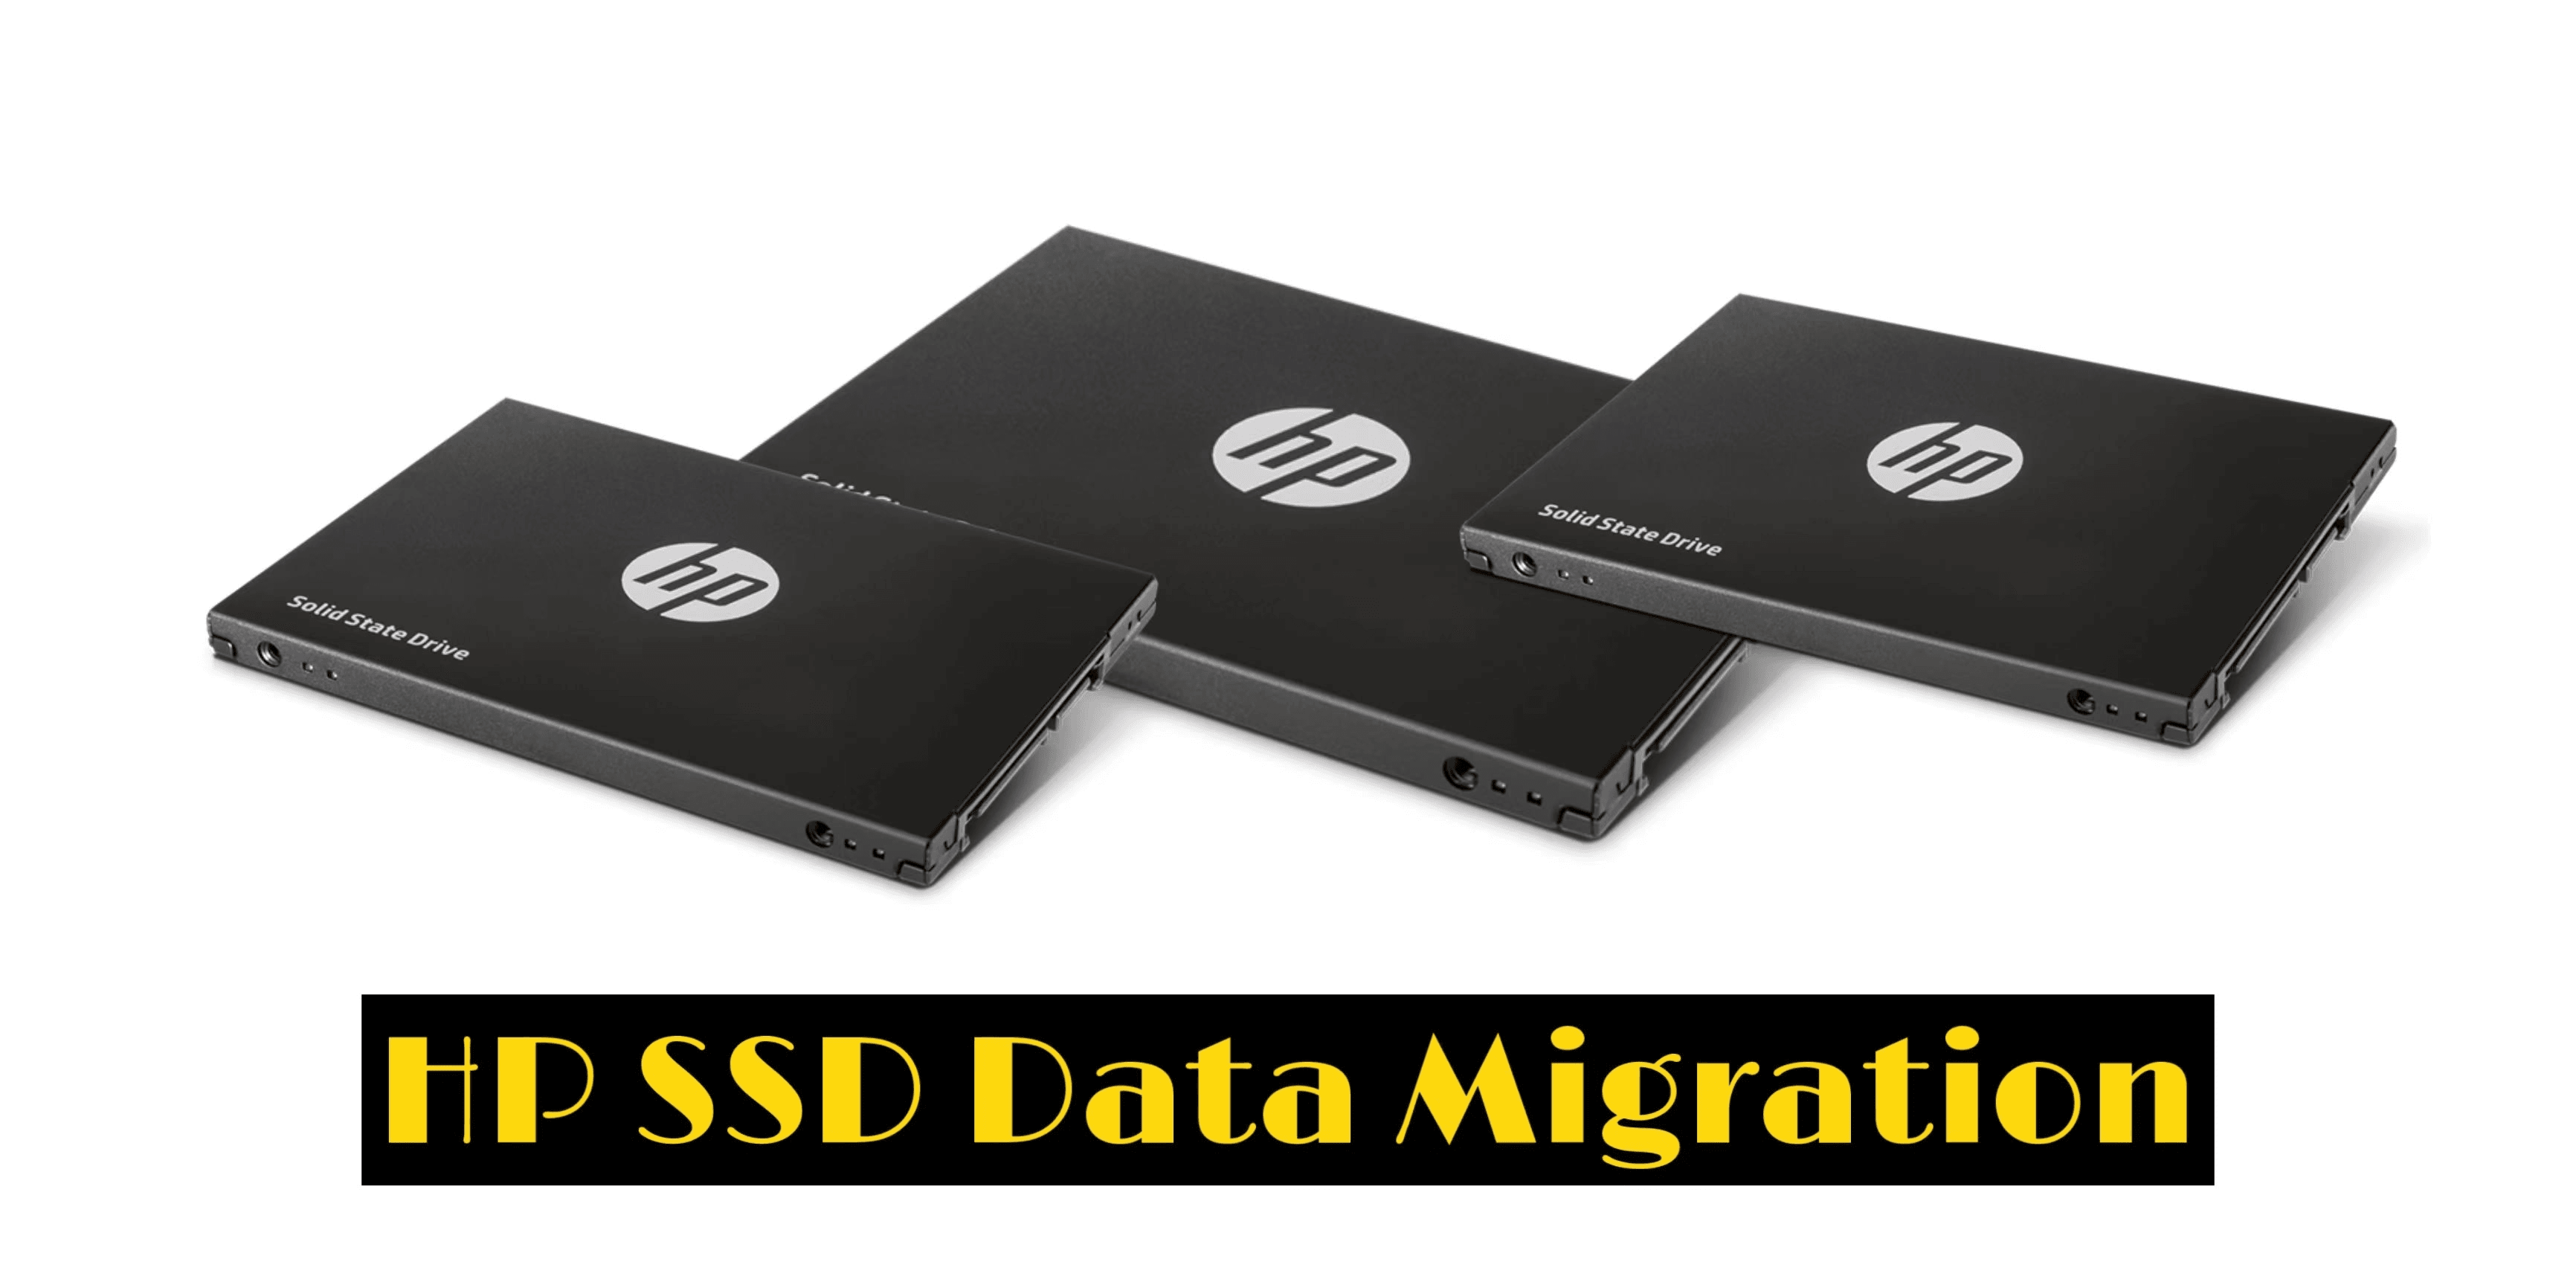 HP SSD Data Migration